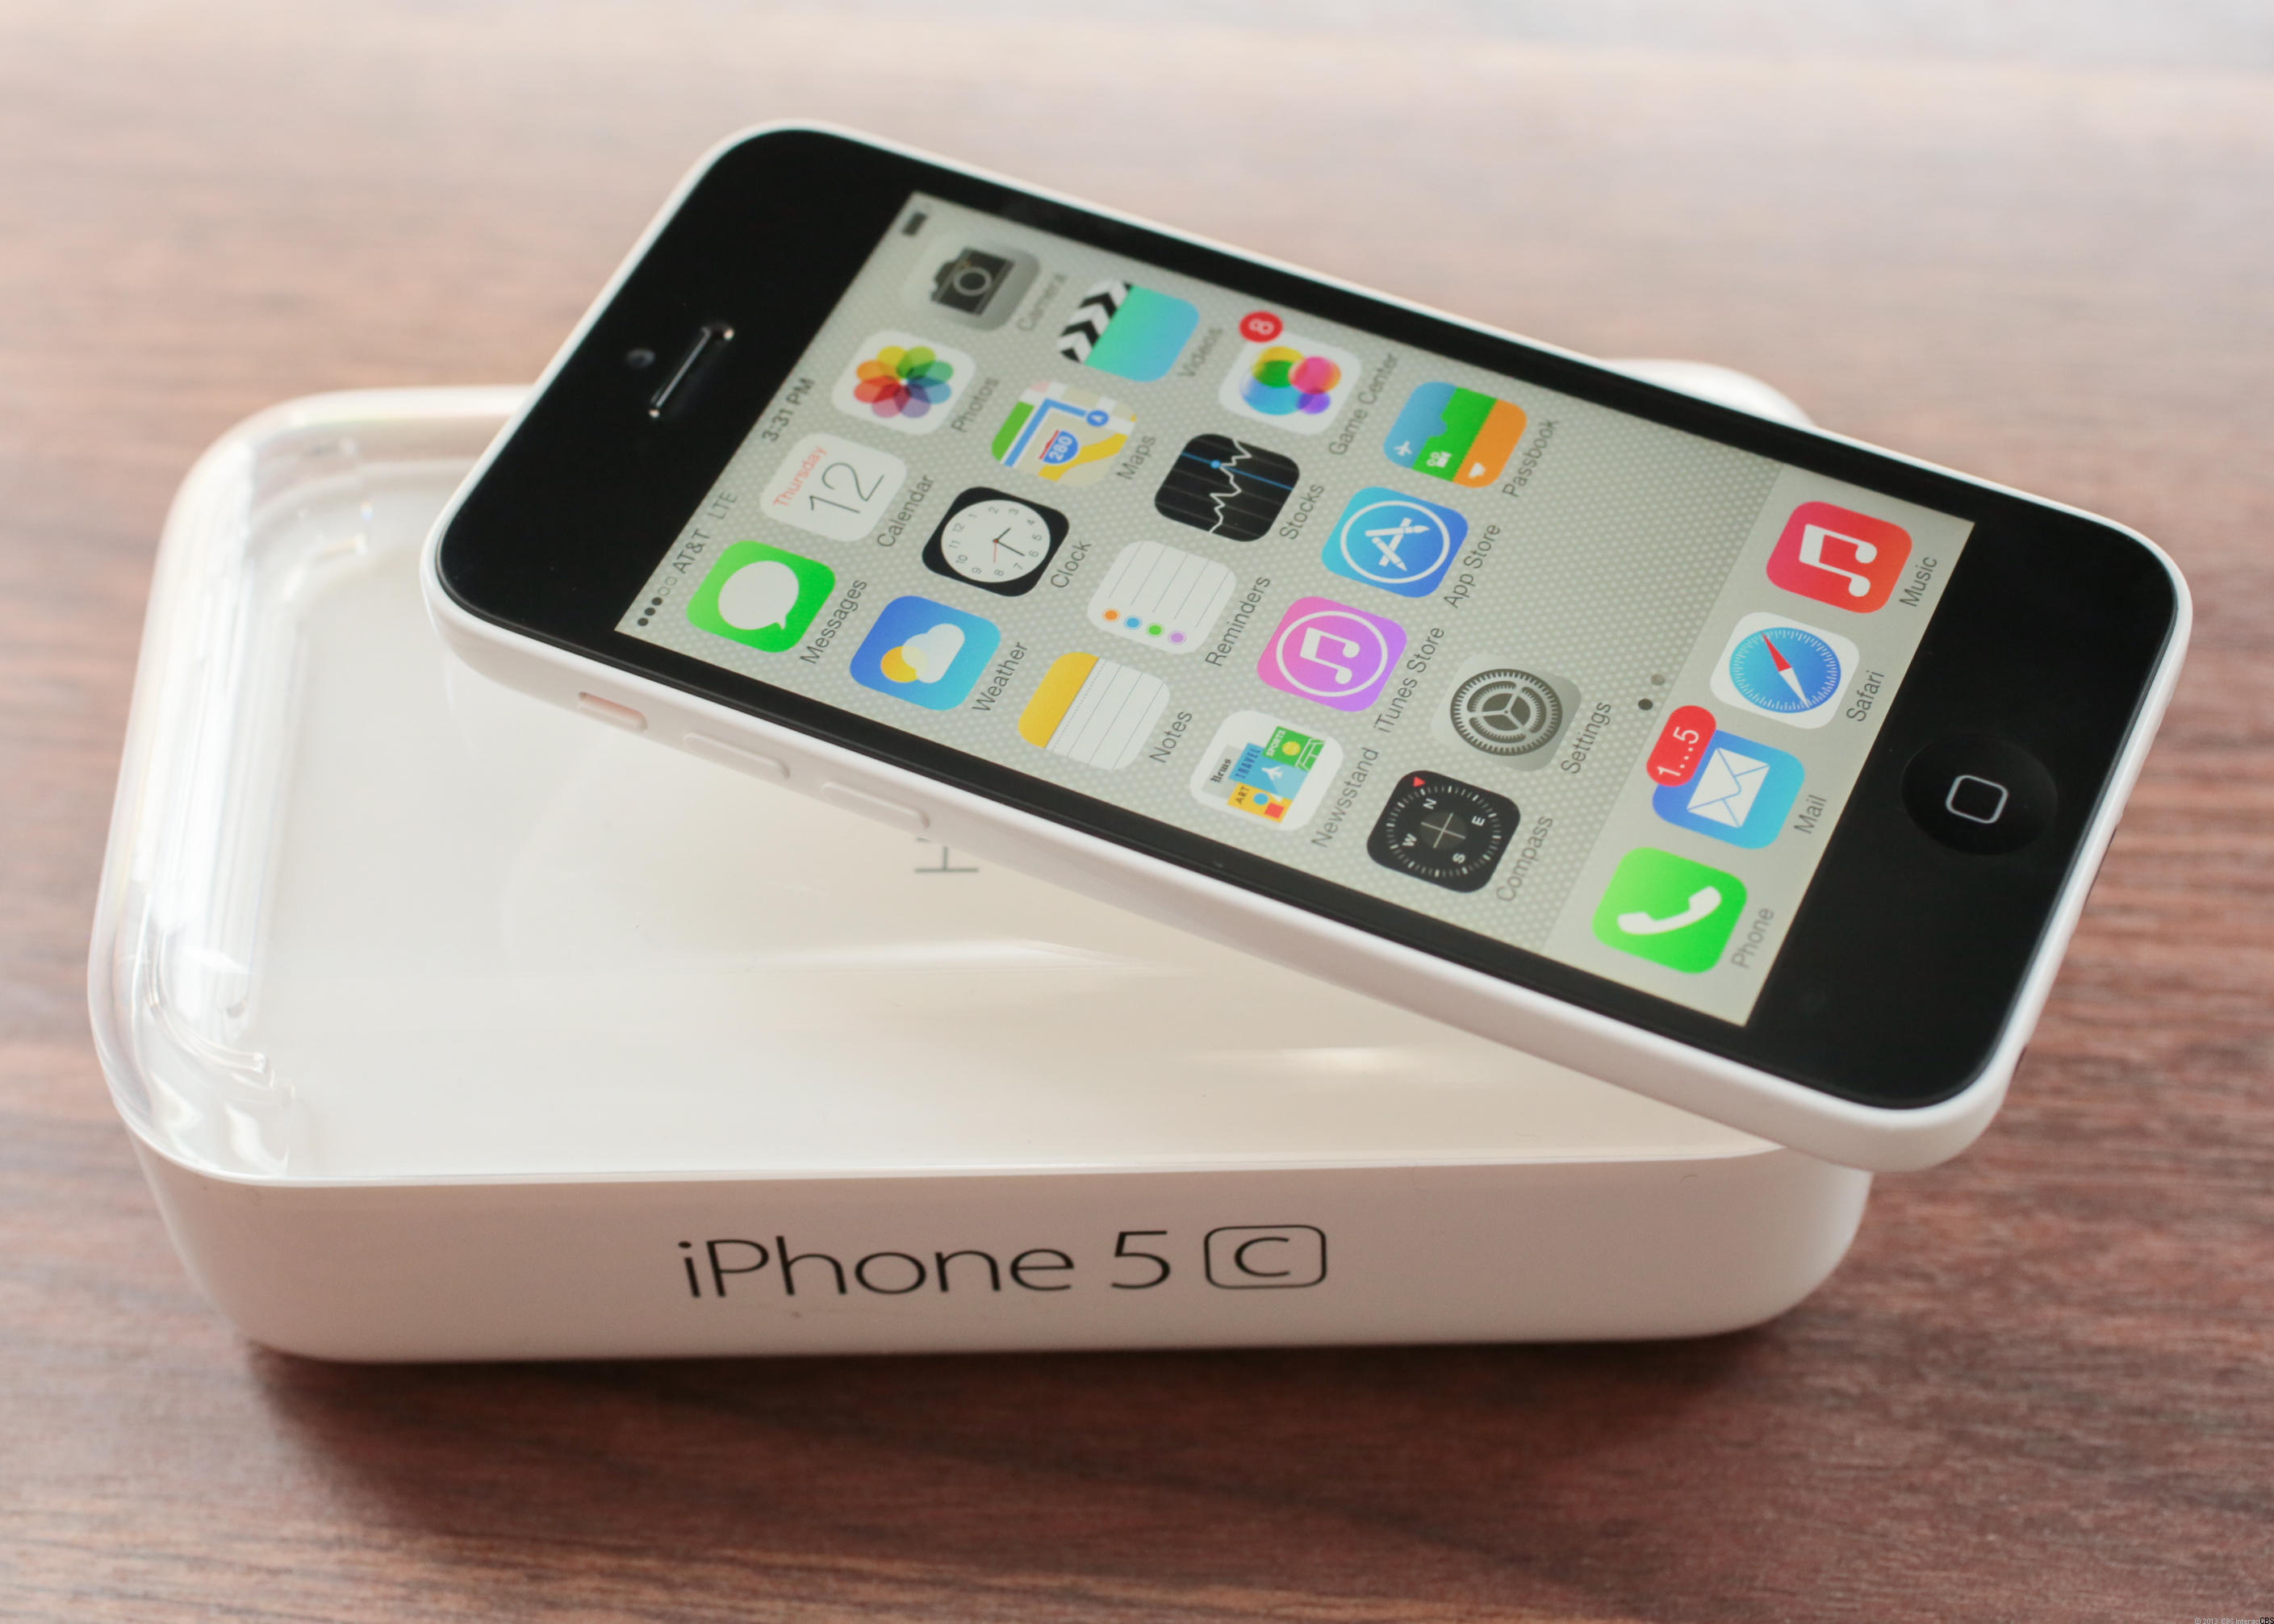 Stoffig herder zak 5 tips for using new iPhone 5C, iPhone 5S, or Apple iOS 7 - CBS News